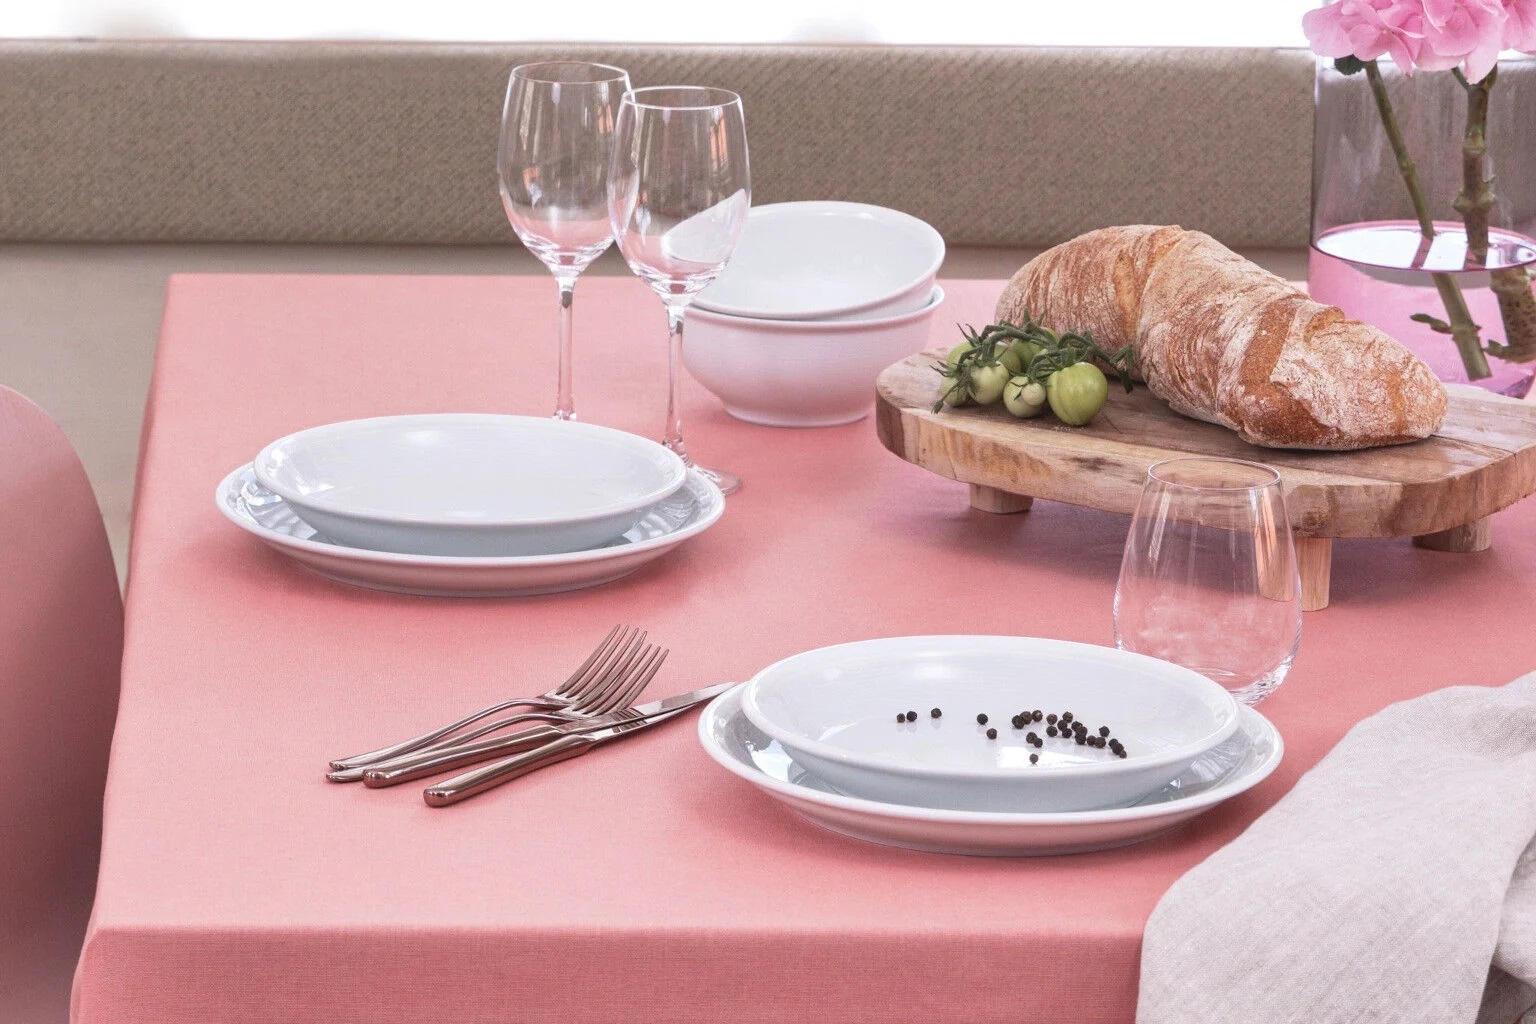 Thomas Trend White plates set on a light pink table cloth